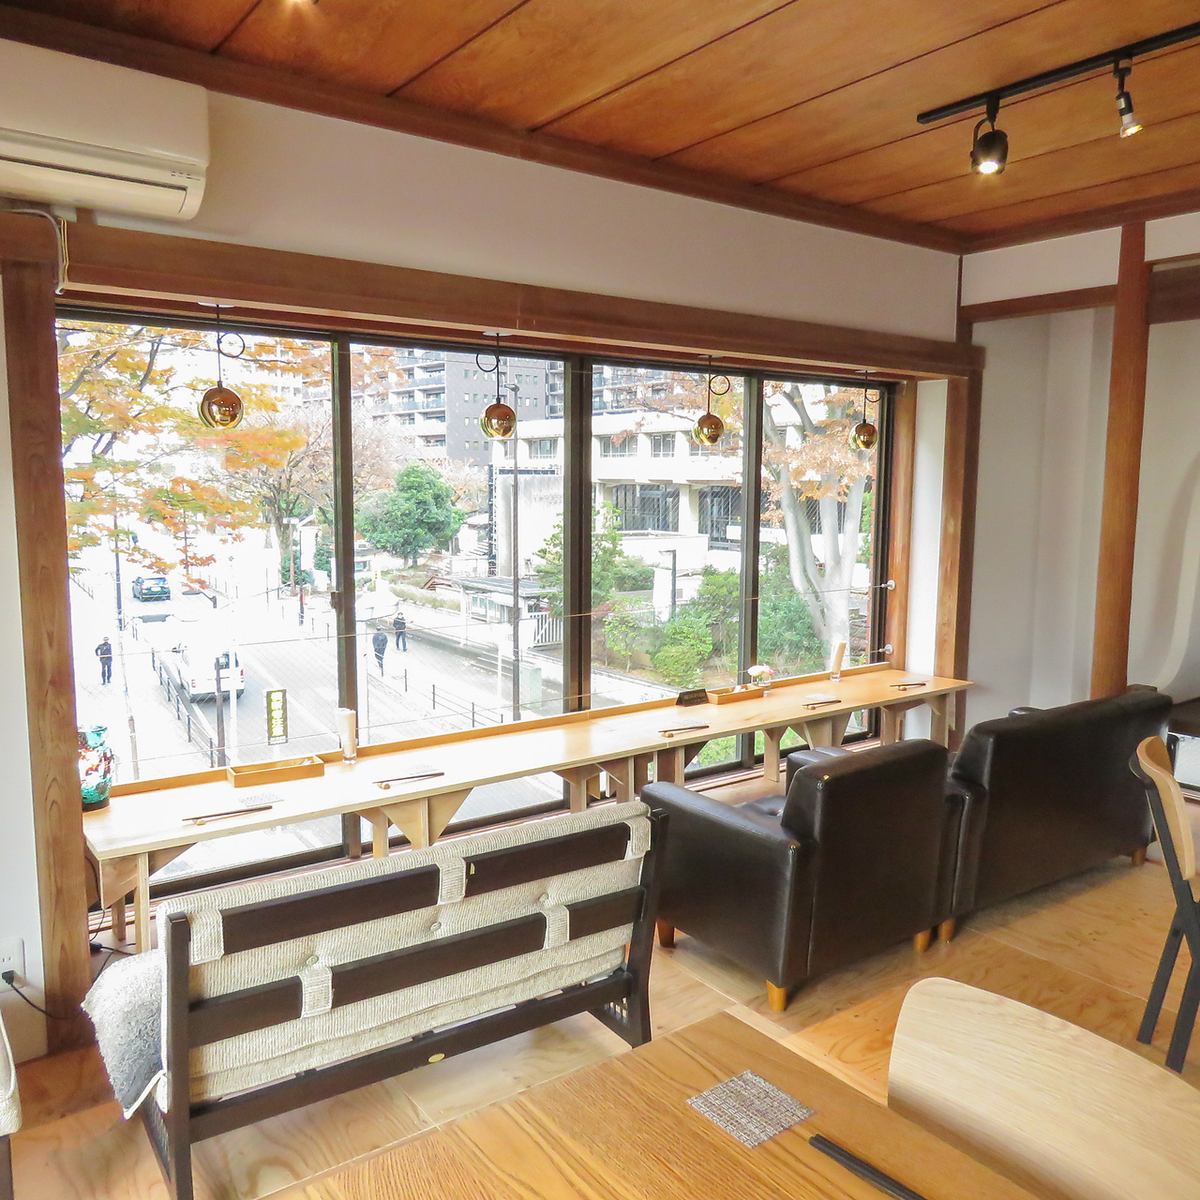 [2 seats only] "Guaranteed window seat holiday lunch (11:00-16:00)" 3,500 yen